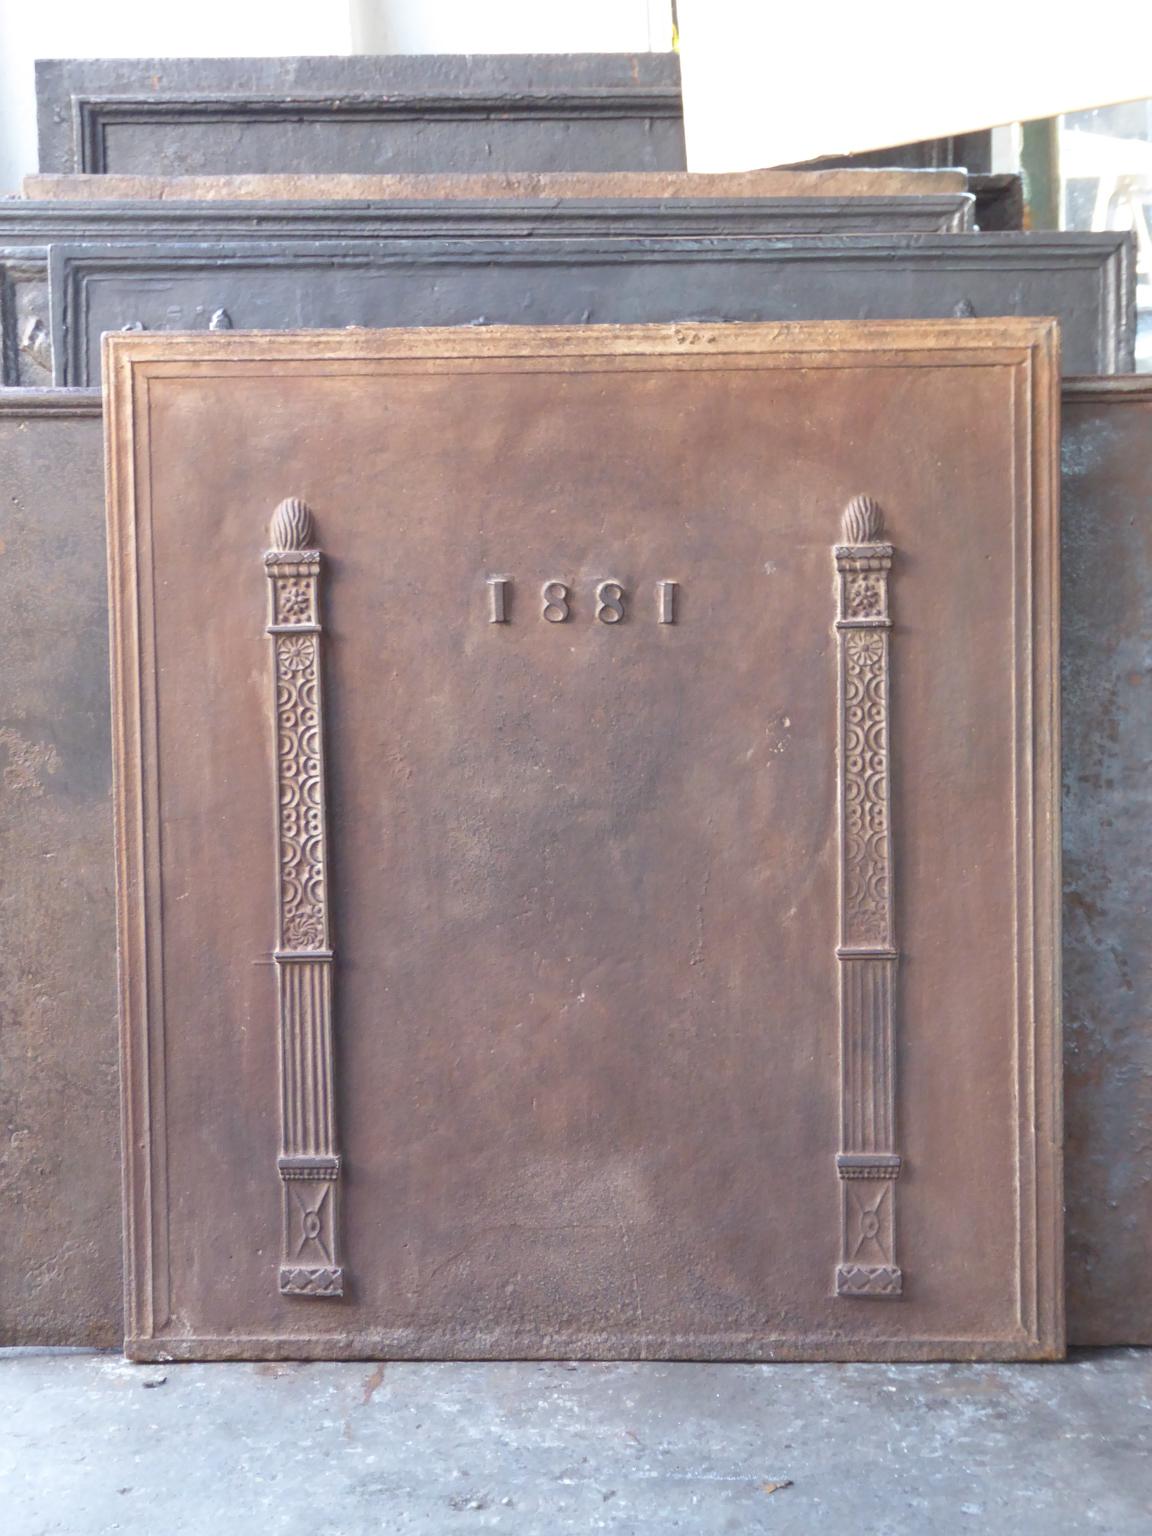 19th century French neoclassical style fireback with two pillars of freedom. The pillars symbolize the value liberty, one of the three values of the French revolution. The date of production of the fireback, 1881, is also cast in the fireback

The